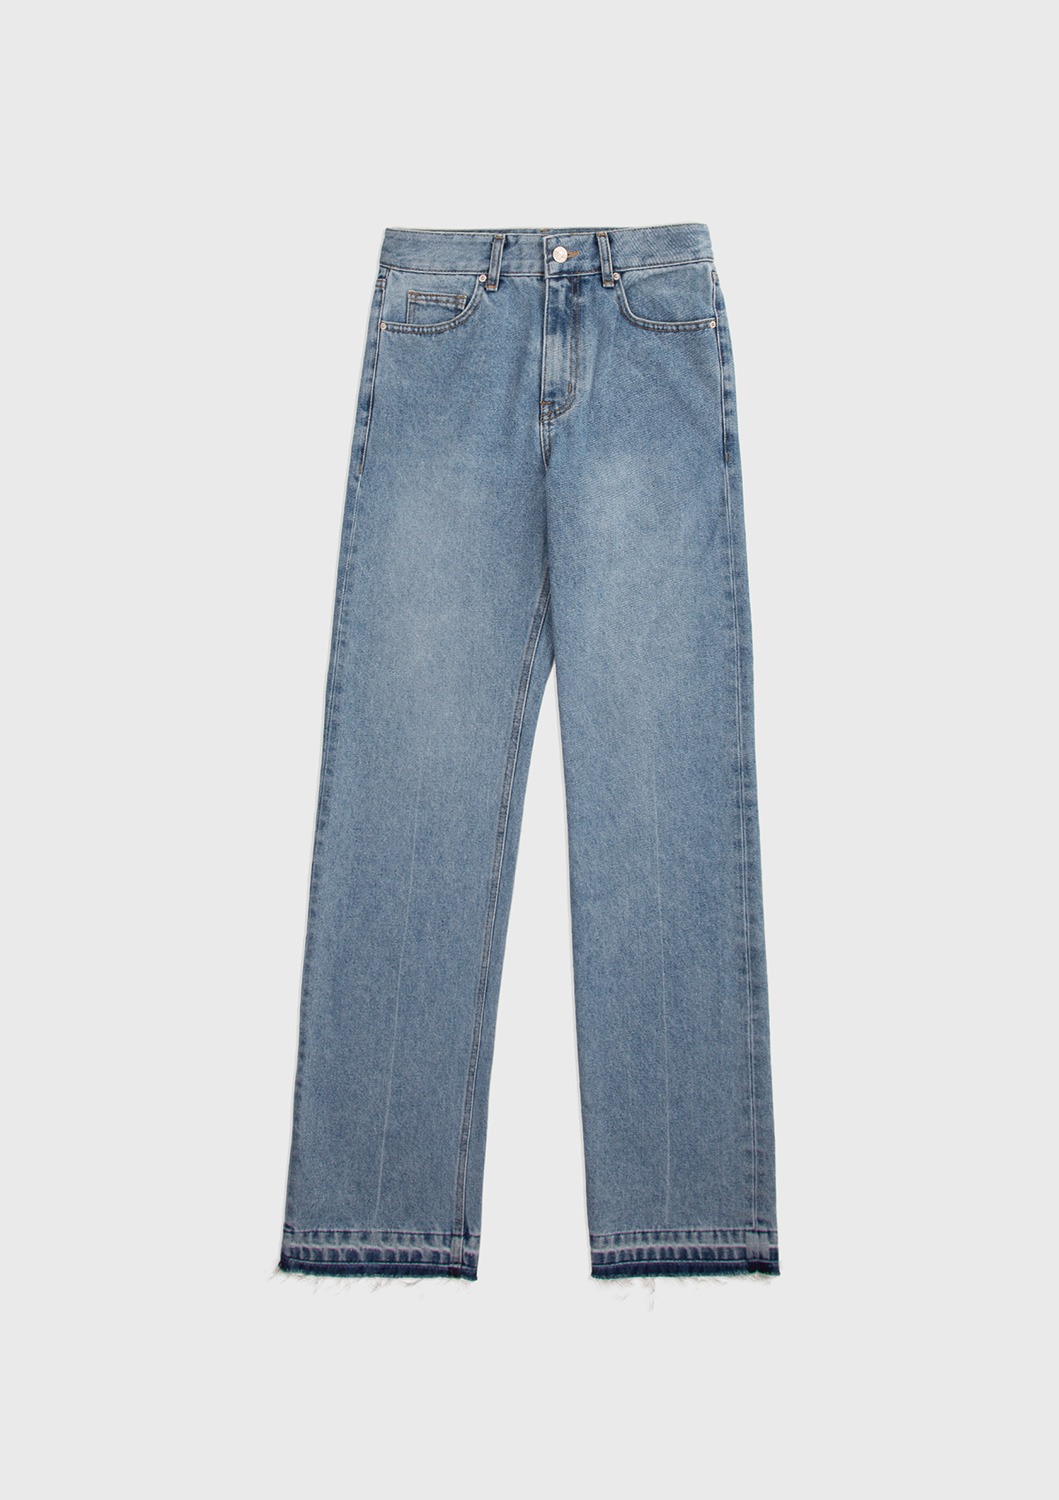 Mused Recycled Denim - Light Blue